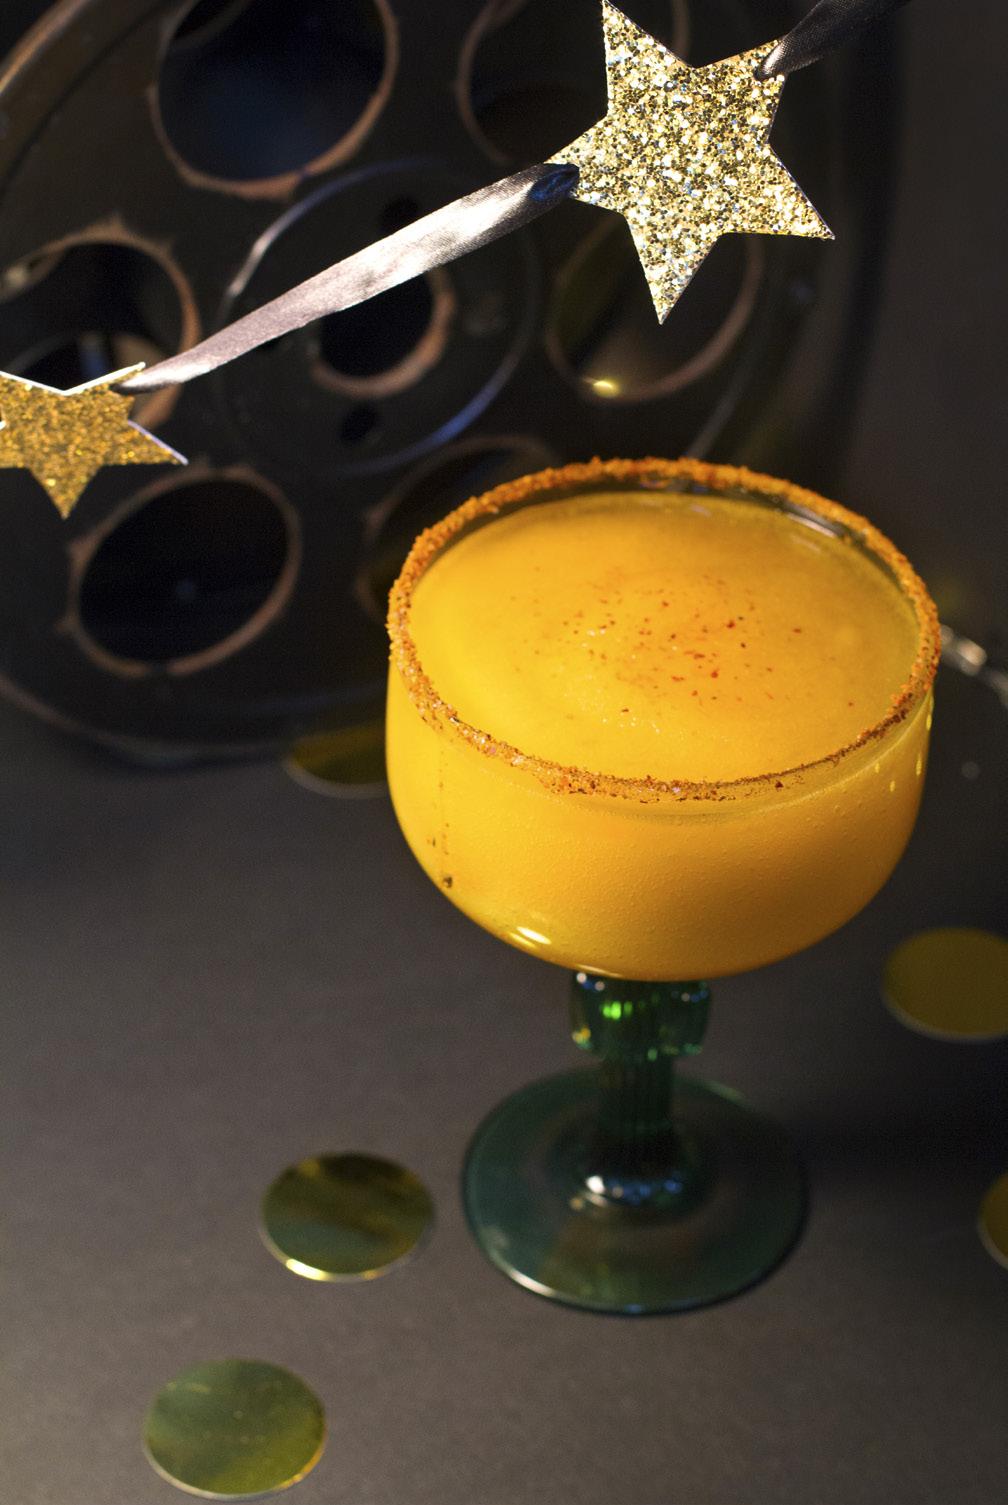 Fools Rush In Some things are just meant to be, like spicy mango margaritas. This 90 s Rom Com inspired drink has a hint of heat, but is perfectly balanced by the sweetness of mango. Yield: 1, 14 oz.